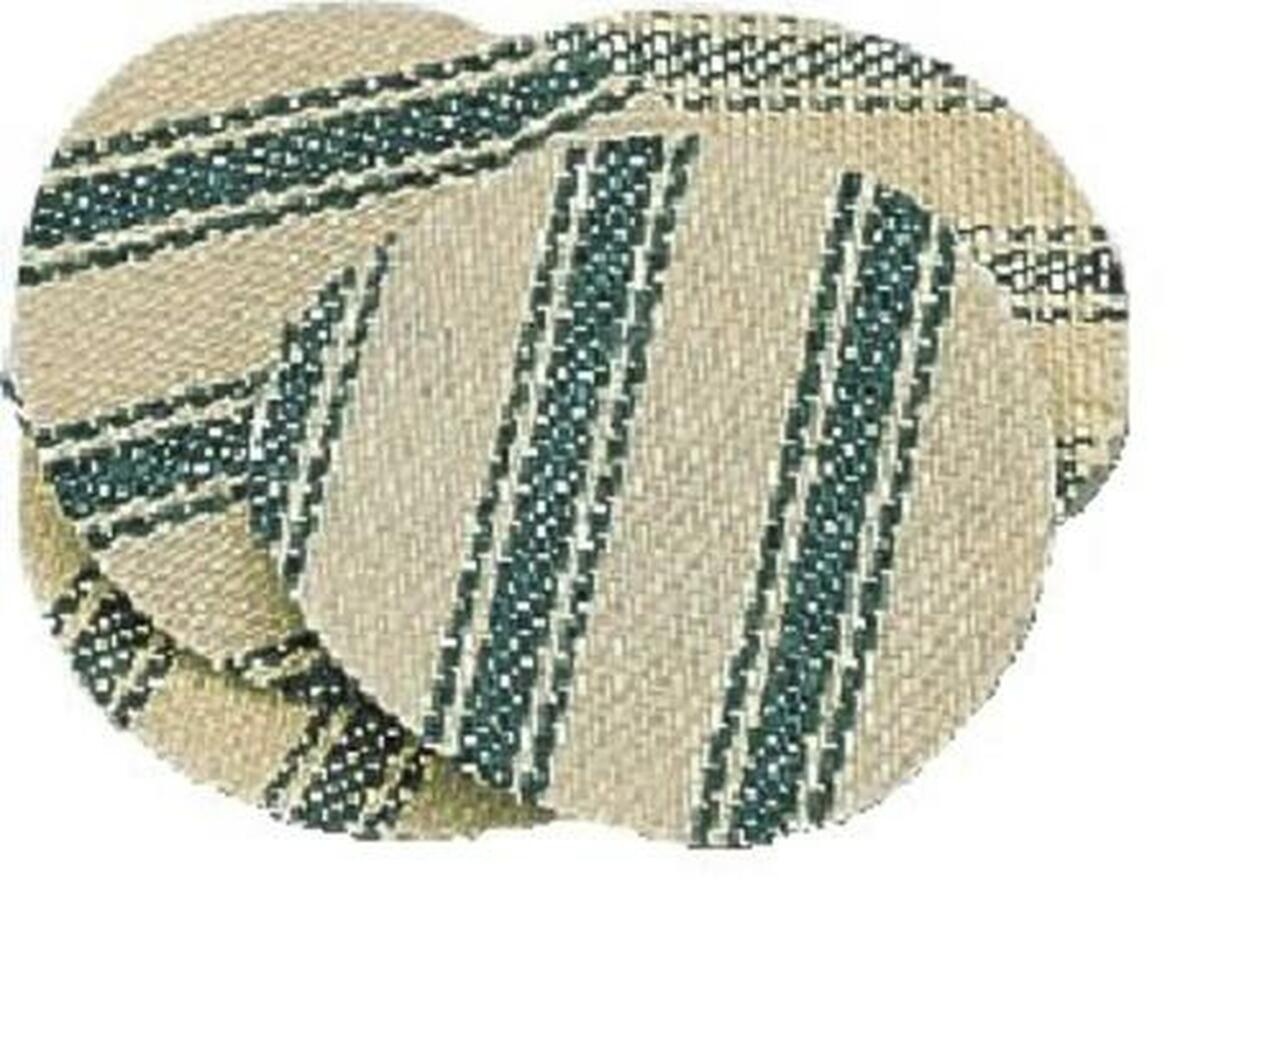 Image of CVA Shooting Patches 50-58 White/Green Striped Cotton Fabric